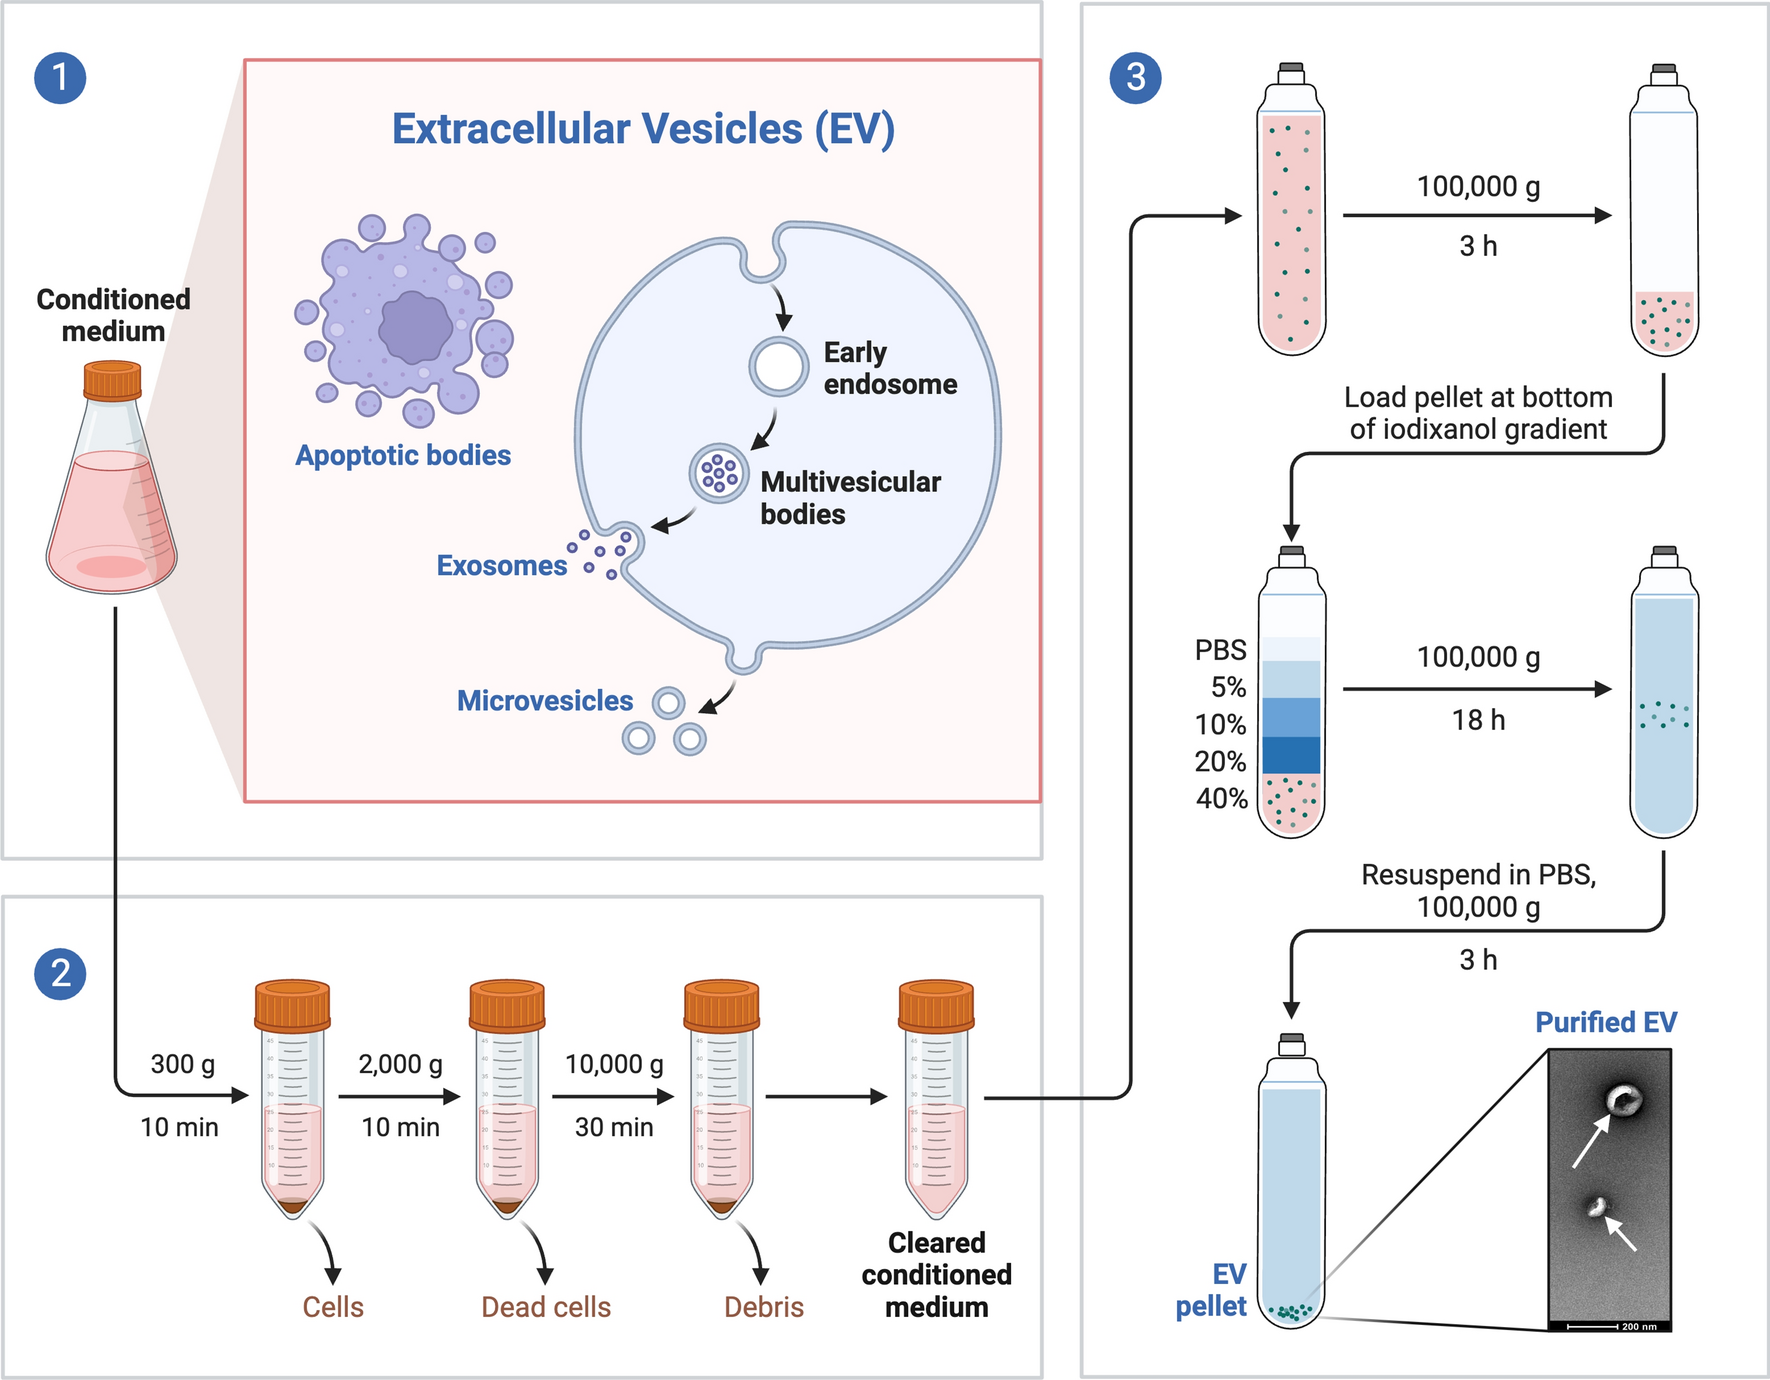 Therapeutic potential of mesenchymal stem cell-derived exosomes for regenerative medicine applications